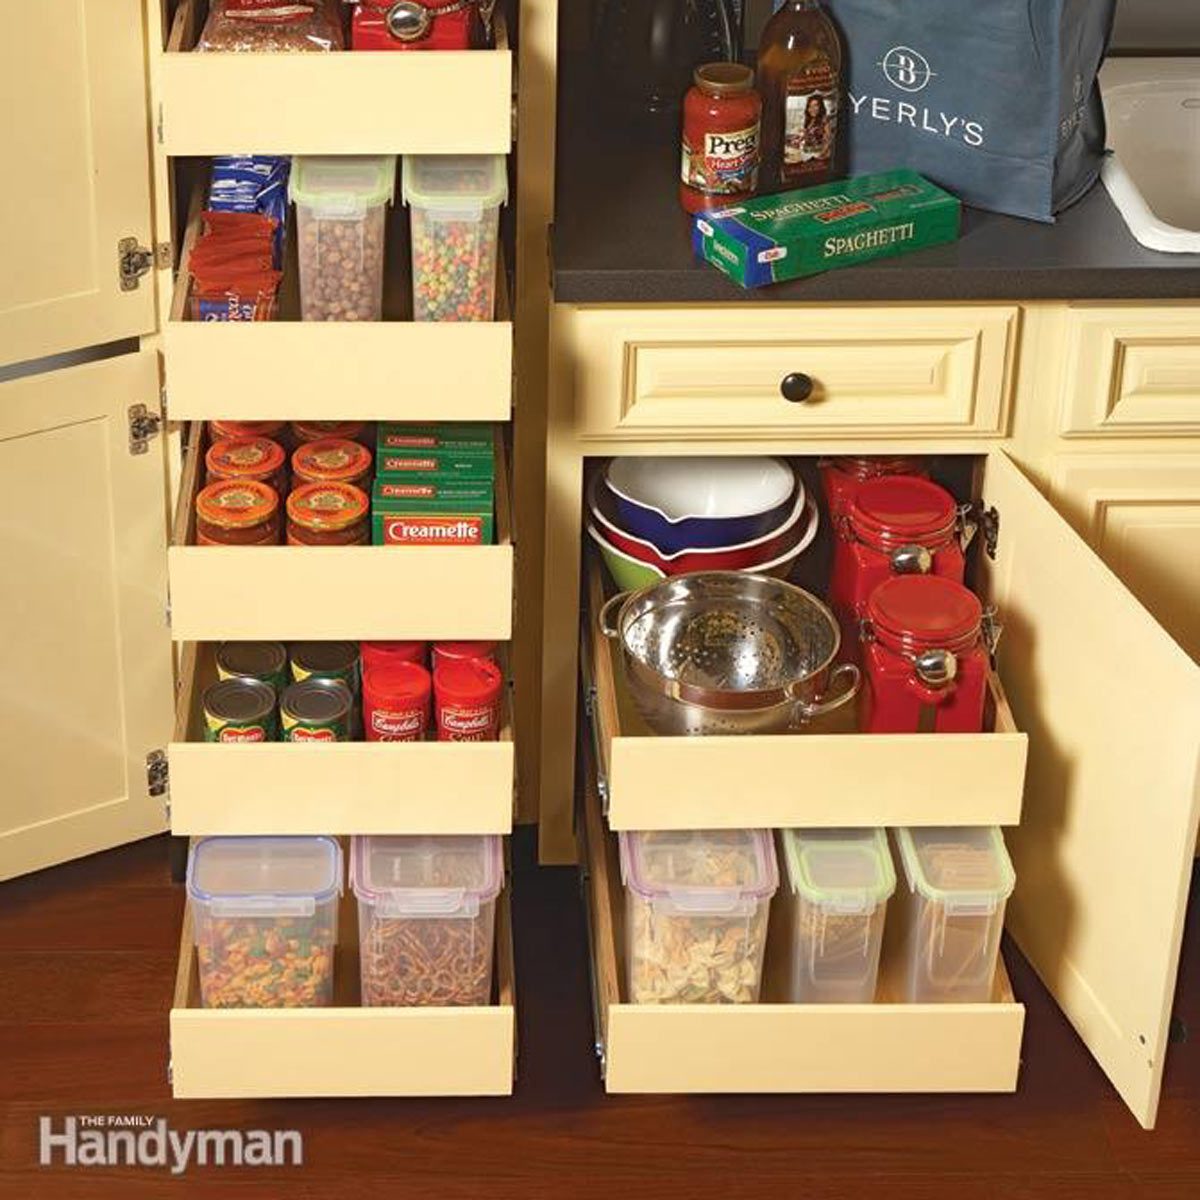 Pull-Out Drawers for Cabinets : 7 Steps (with Pictures